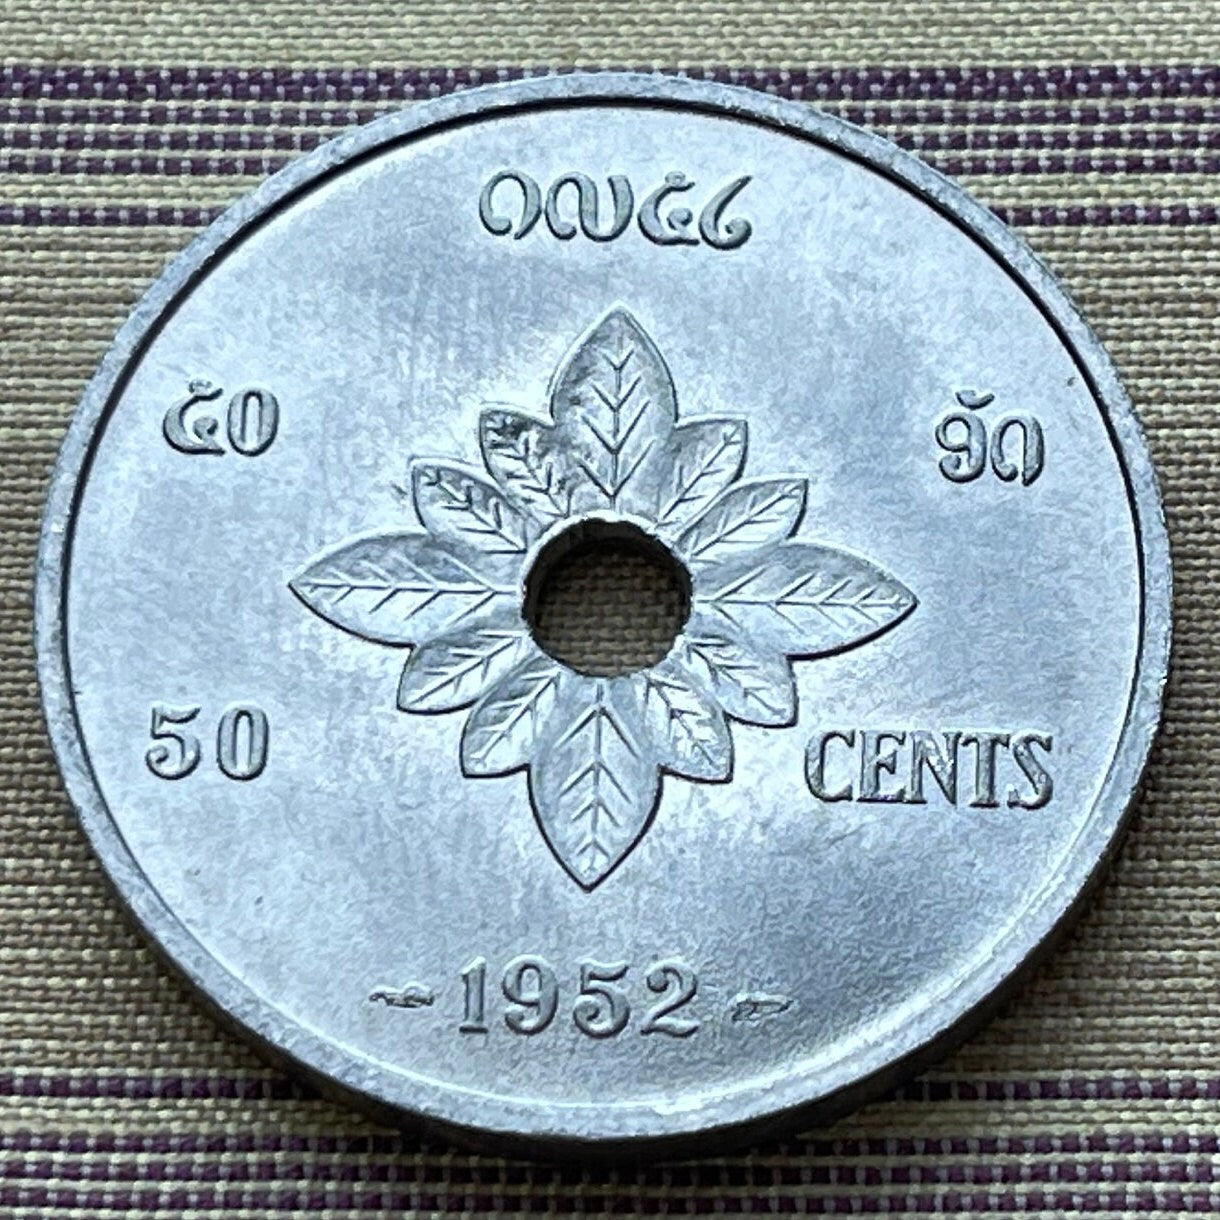 Lotus Blossom of Emptiness & Constitution Book atop Almsgiving Bowl 50 Cents Laos Authentic Coin Money for Jewelry (Empty Hole in Coin) 1952